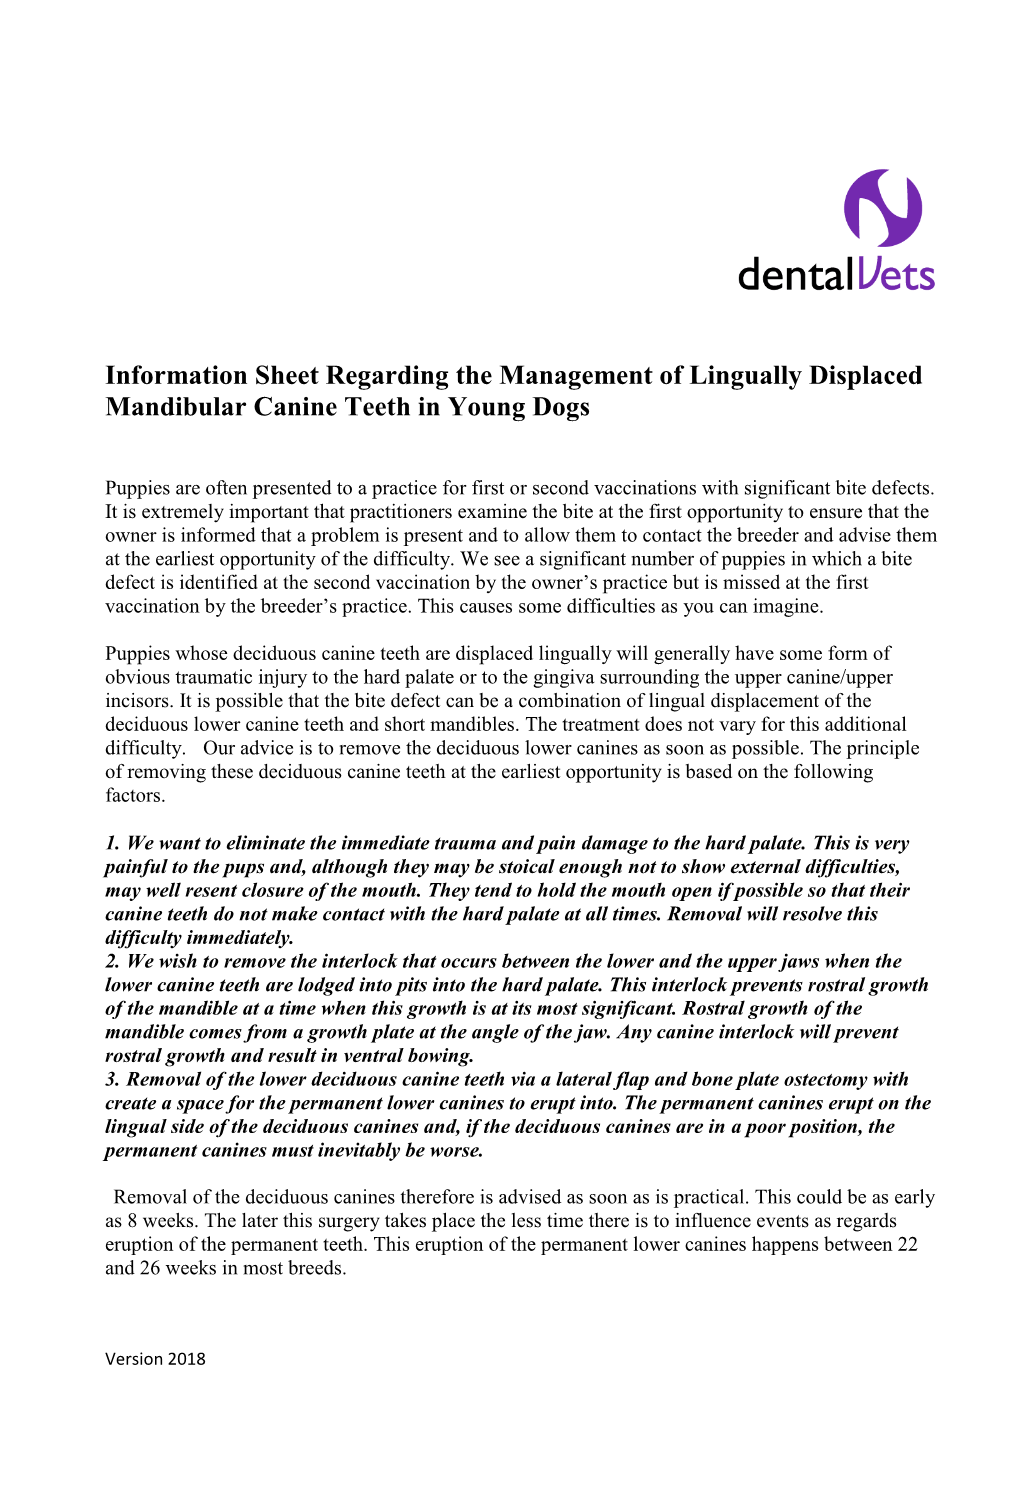 Information Sheet Regarding the Management of Lingually Displaced Mandibular Canine Teeth in Young Dogs